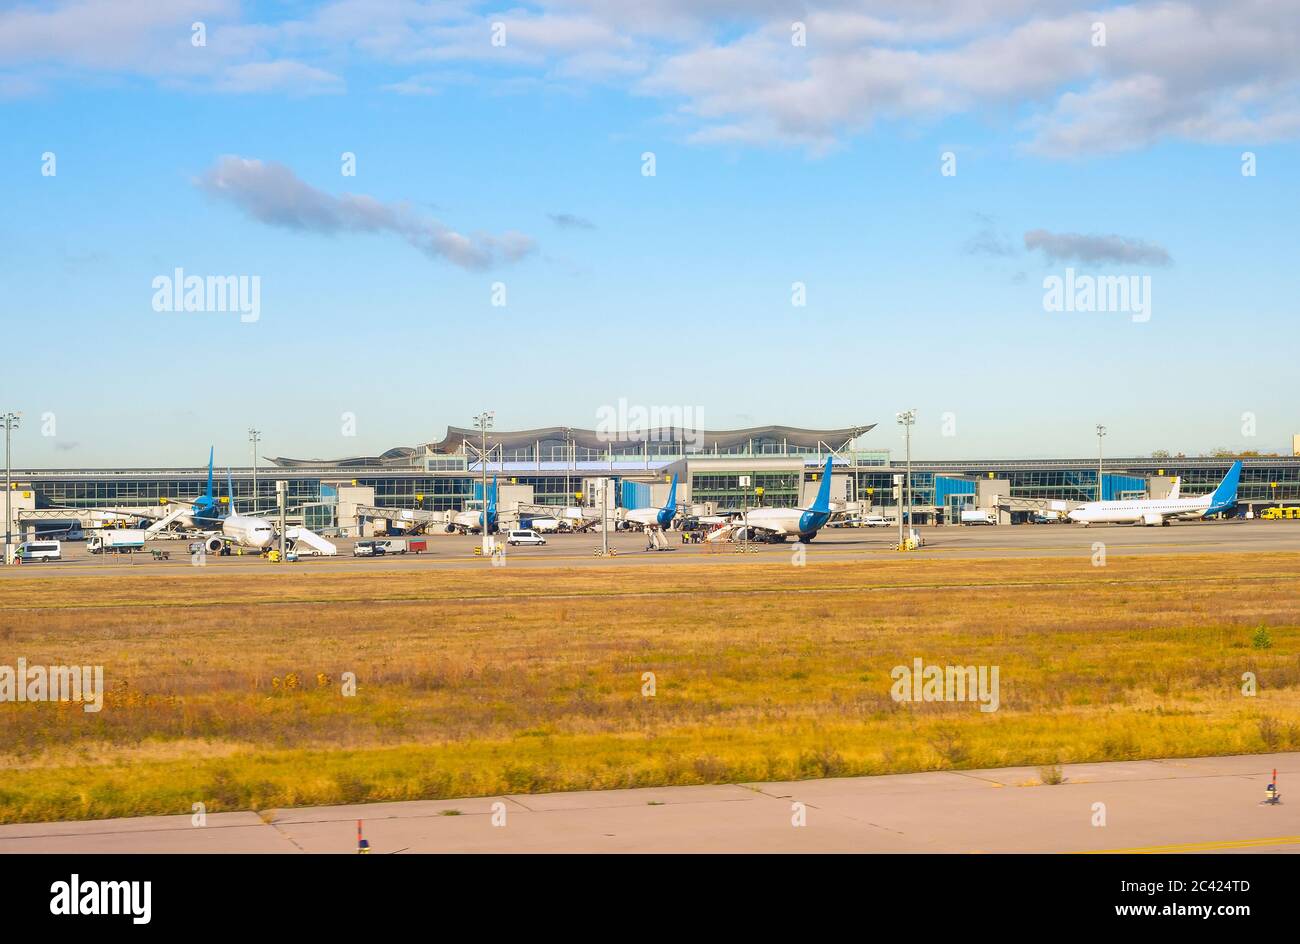 Airfield in sunshine, airplanes by the terminal modern building, Boryspil International Airport, Kyiv, Ukraine Stock Photo